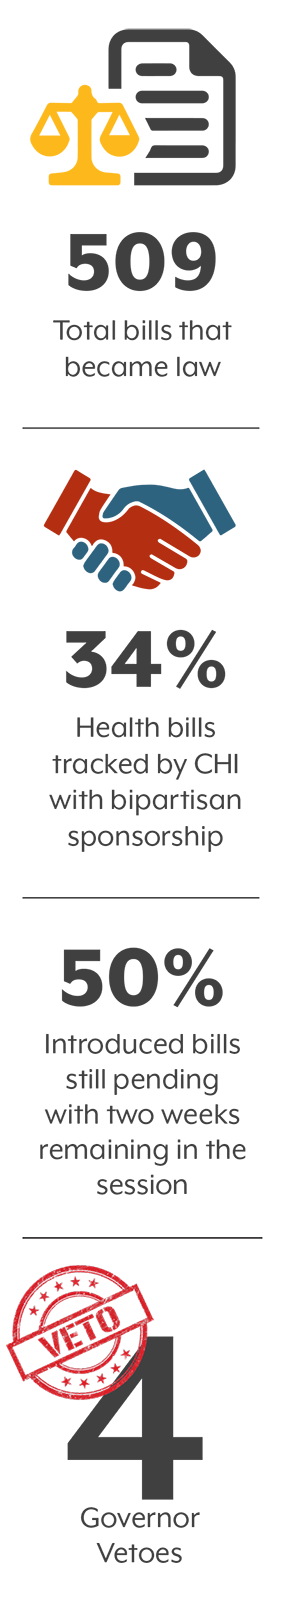 Graphics showing 2022 legislative stats: 509 bills became law, 34 health bills with bipartisan sponsorship, 50% of bills still active in last two weeks of session, 4 vetoes